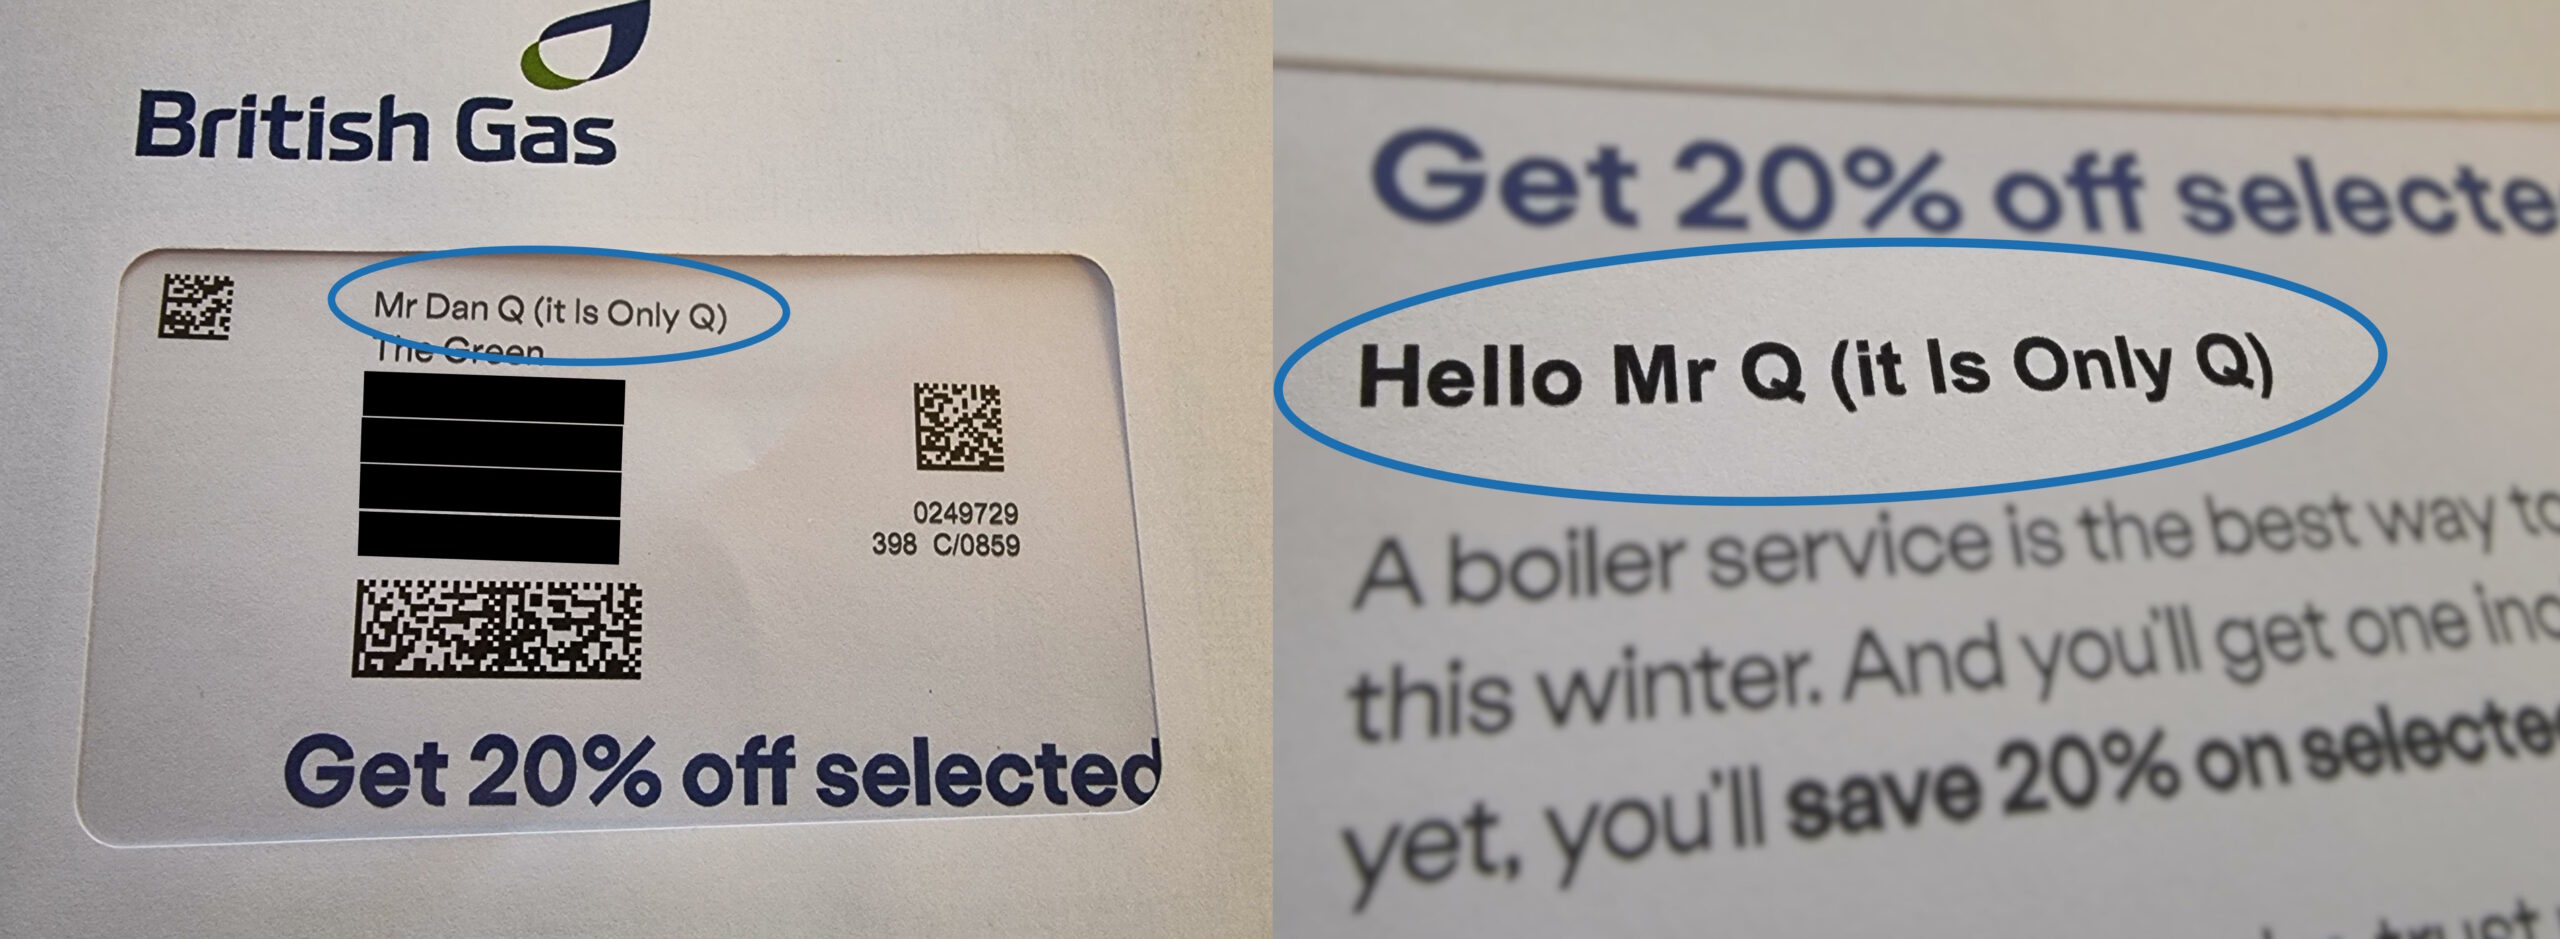 Letter from British Gas addressed to "Mr Dan Q (it Is Only Q)" and opening with "Hello Mr Q (it Is Only Q)".